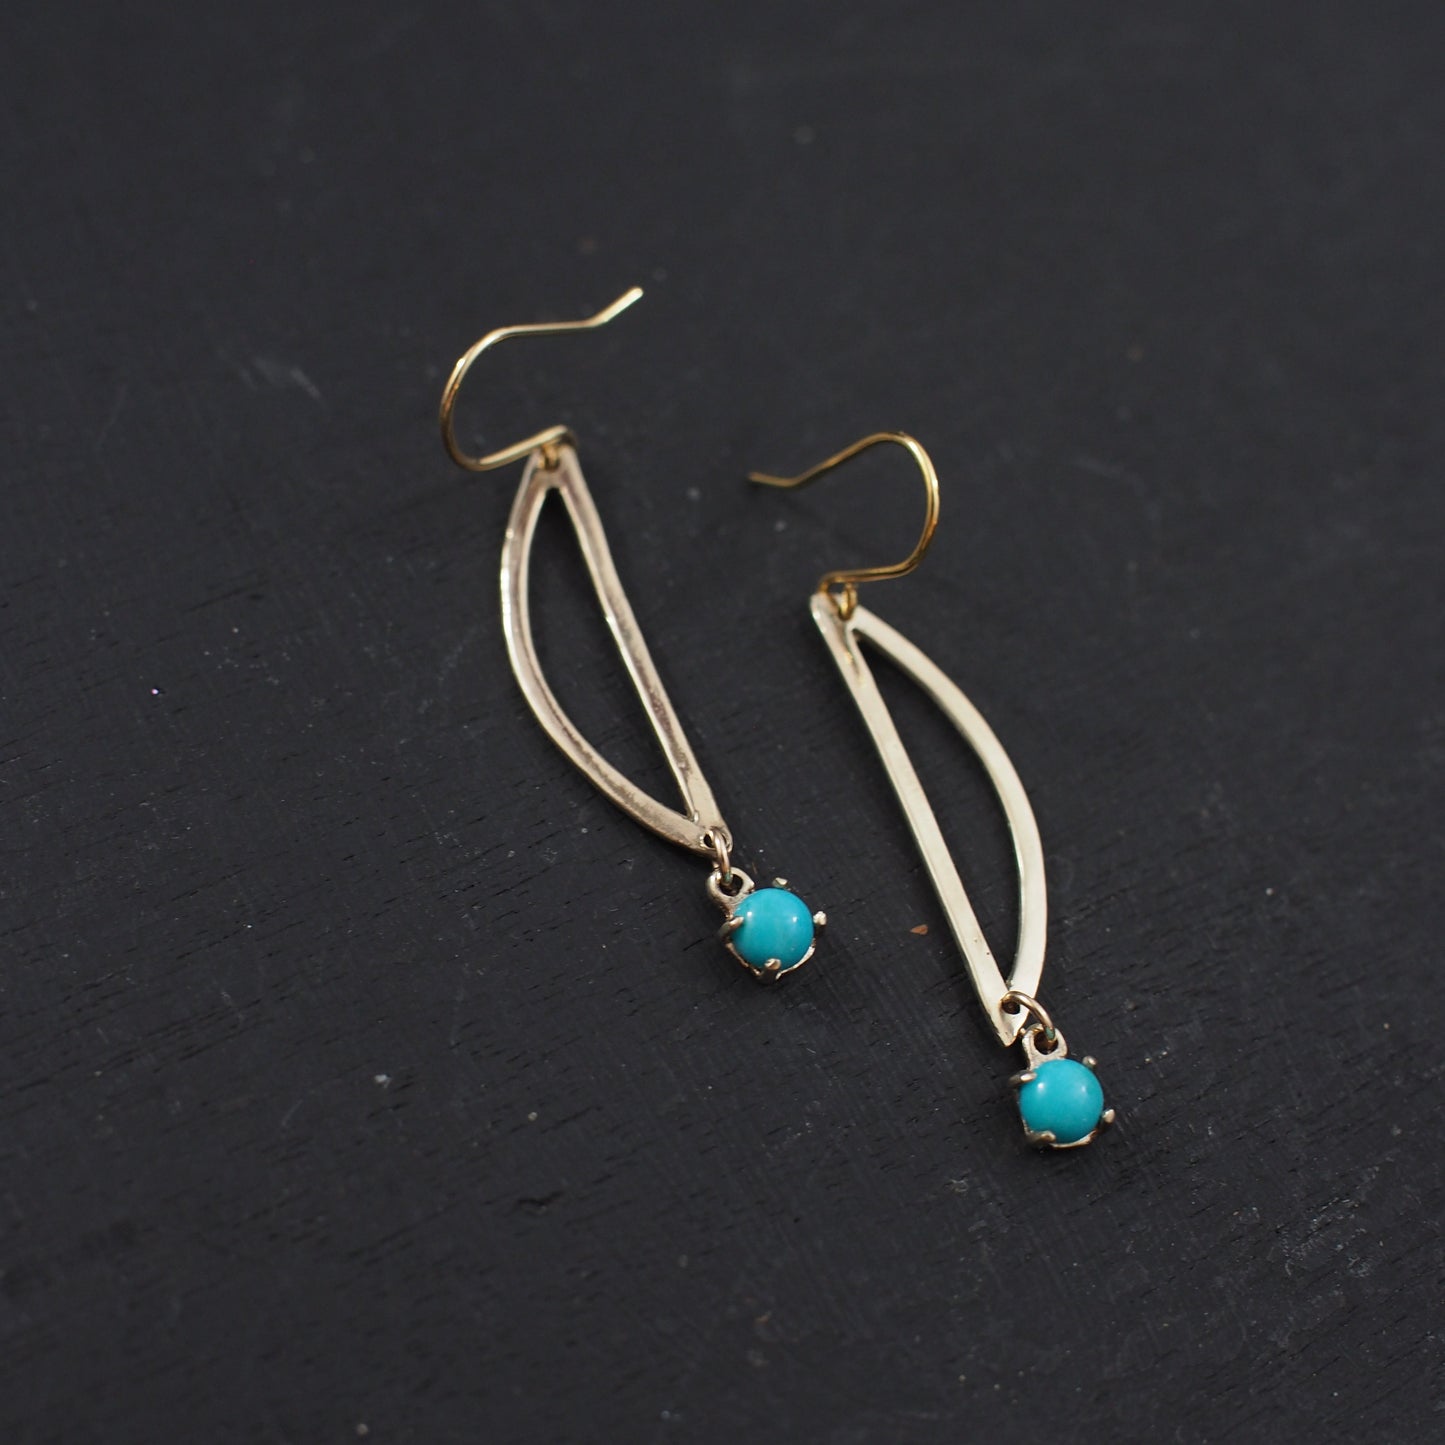 Turquoise Moon Drop Earrings - One of a Kind